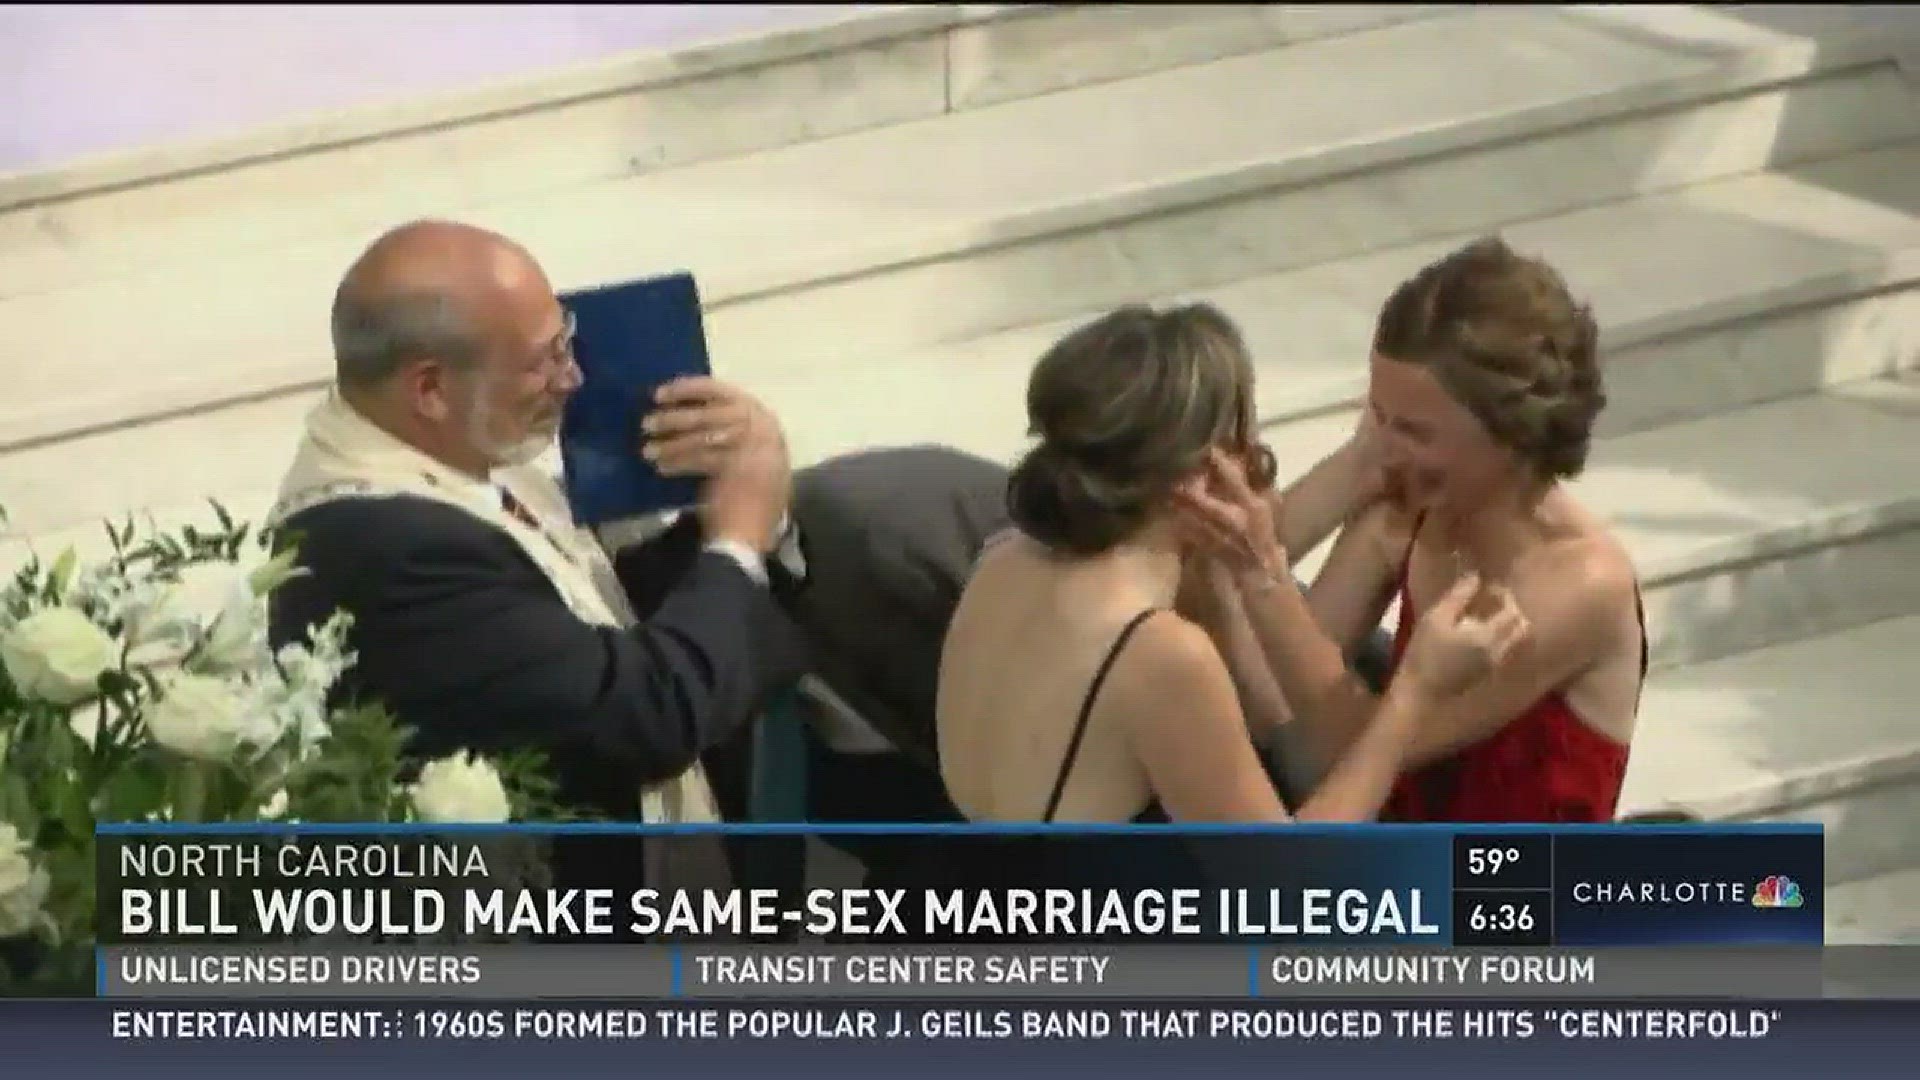 Bill would make same-sex marriage illegal wcnc photo